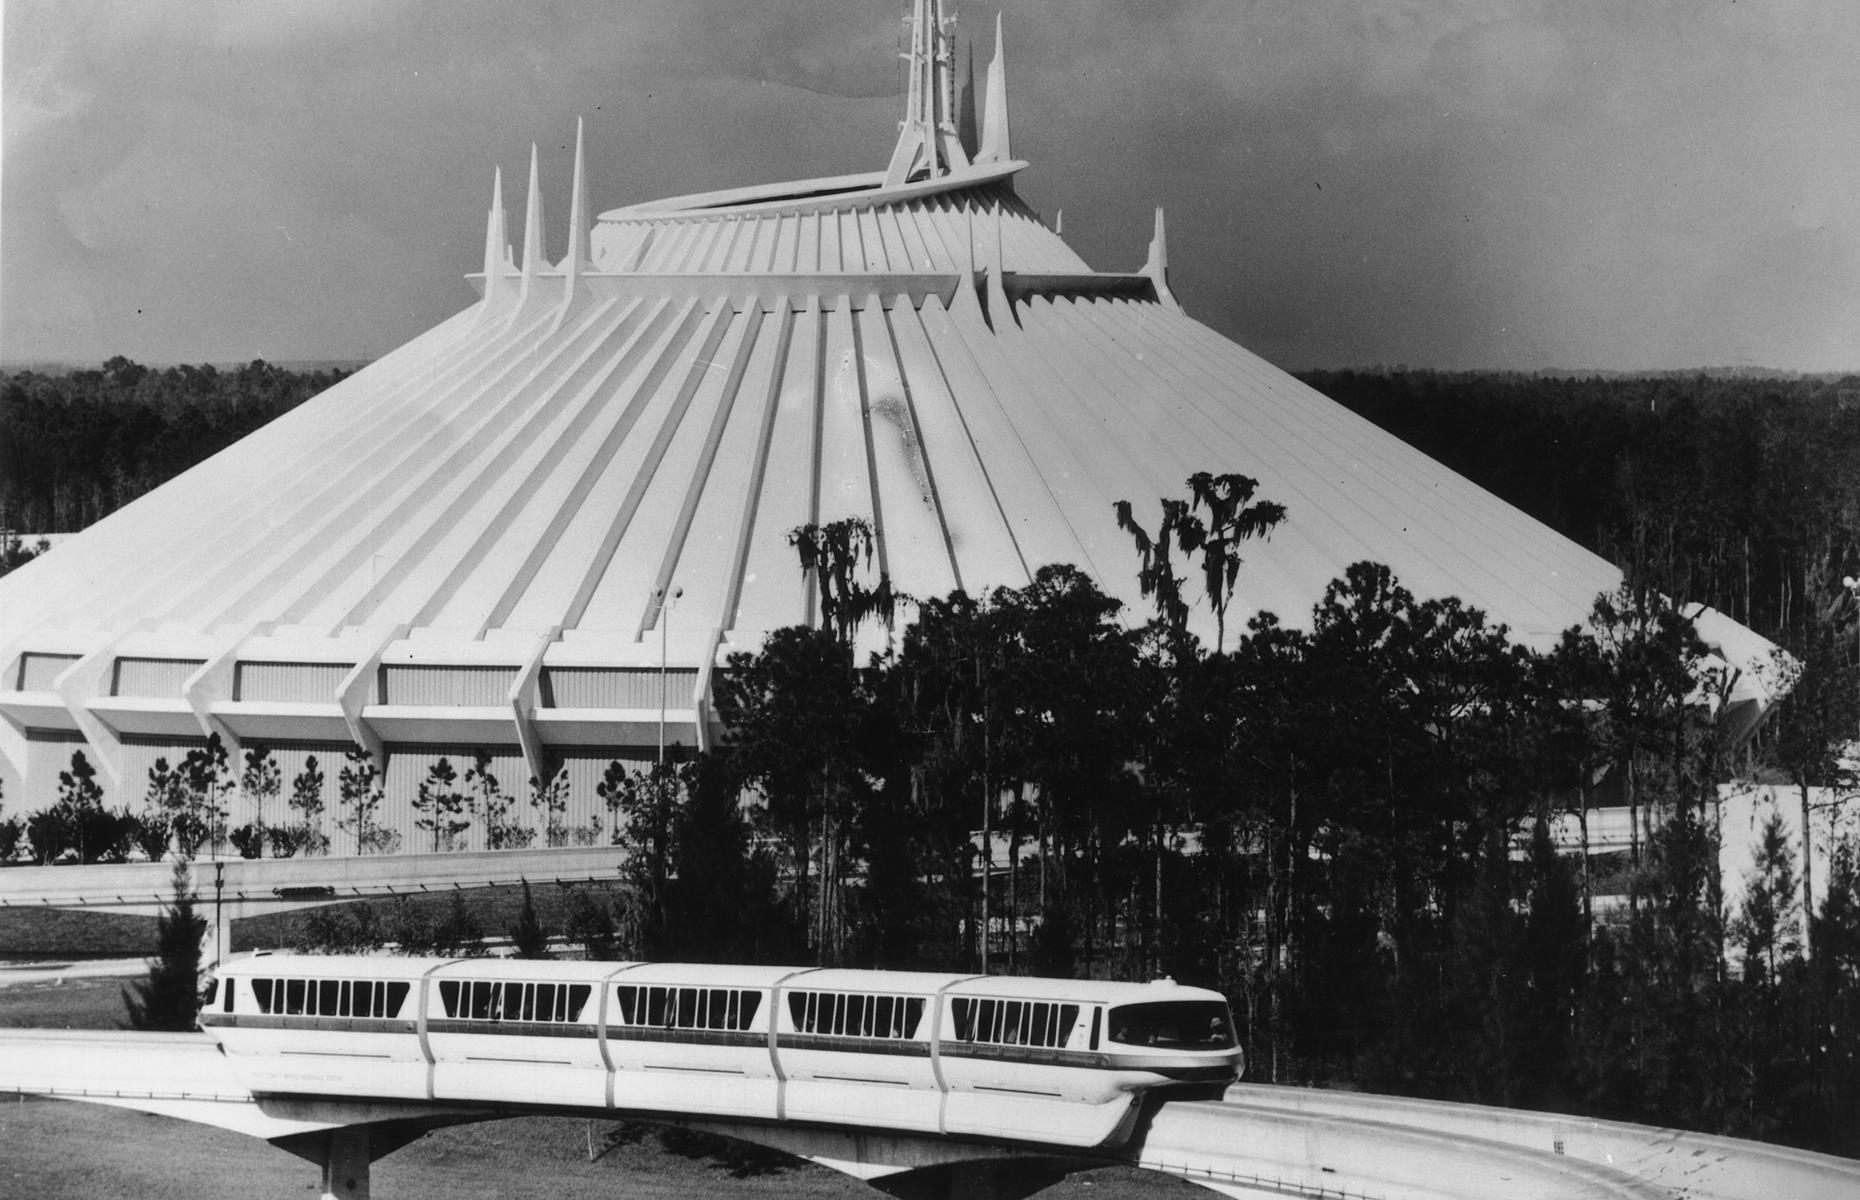 Slide 27 of 38: Remaining one of Disney's most popular rides, Space Mountain debuted in 1975, around four years after Magic Kingdom's opening. An indoor, space-themed roller coaster, it was extremely hi-tech for its day, with guests riding in the dark and enjoying stunning projections of stars and planets. Now the cosmic attraction has a place in Disney parks around the globe.